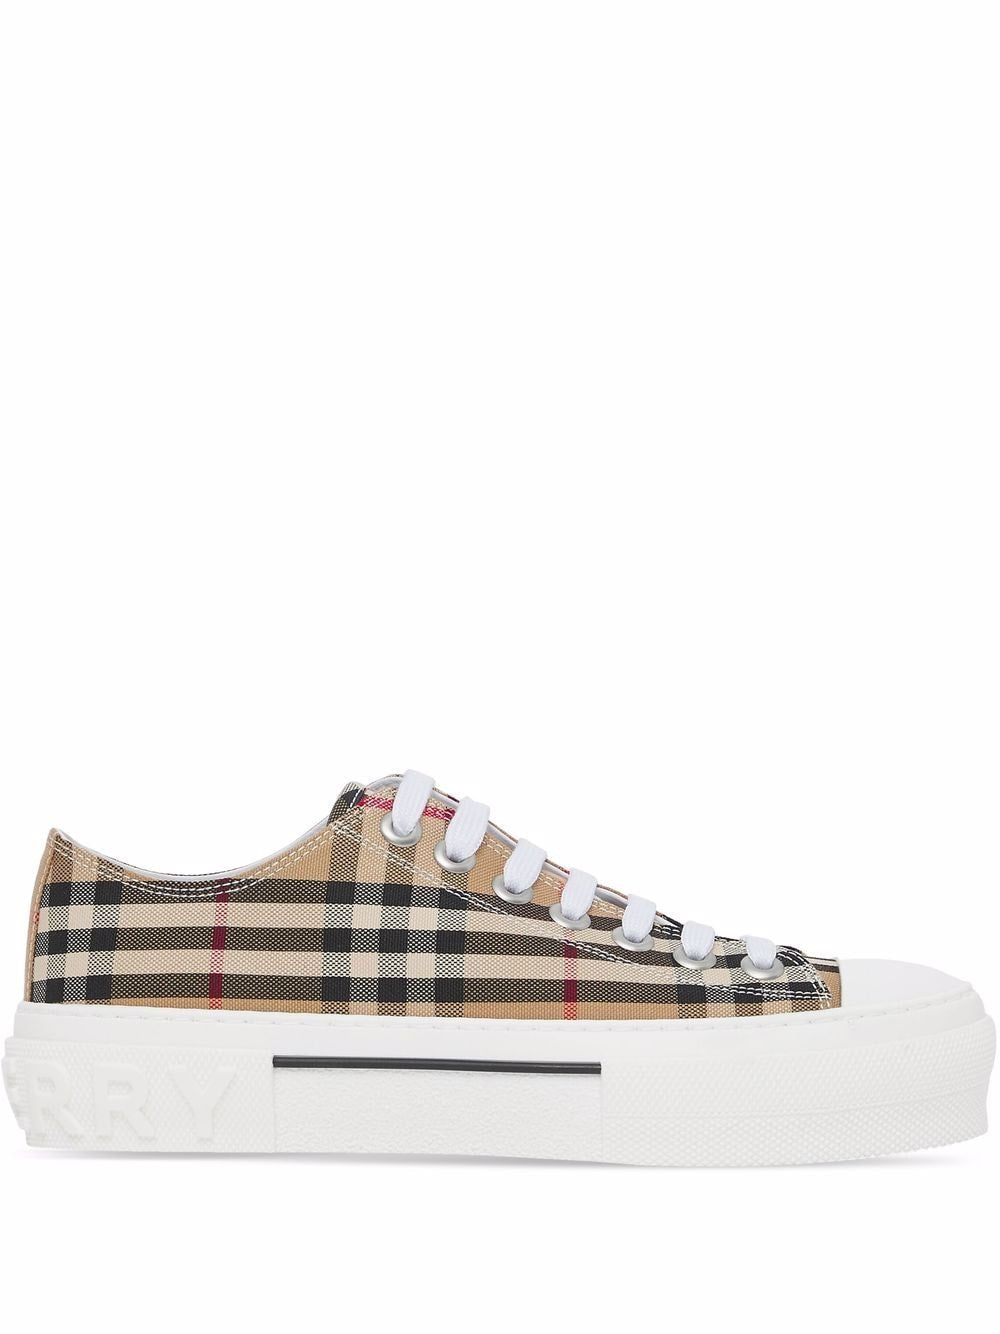 BURBERRY Beige Check Cotton Canvas Low Top Sneakers for Women